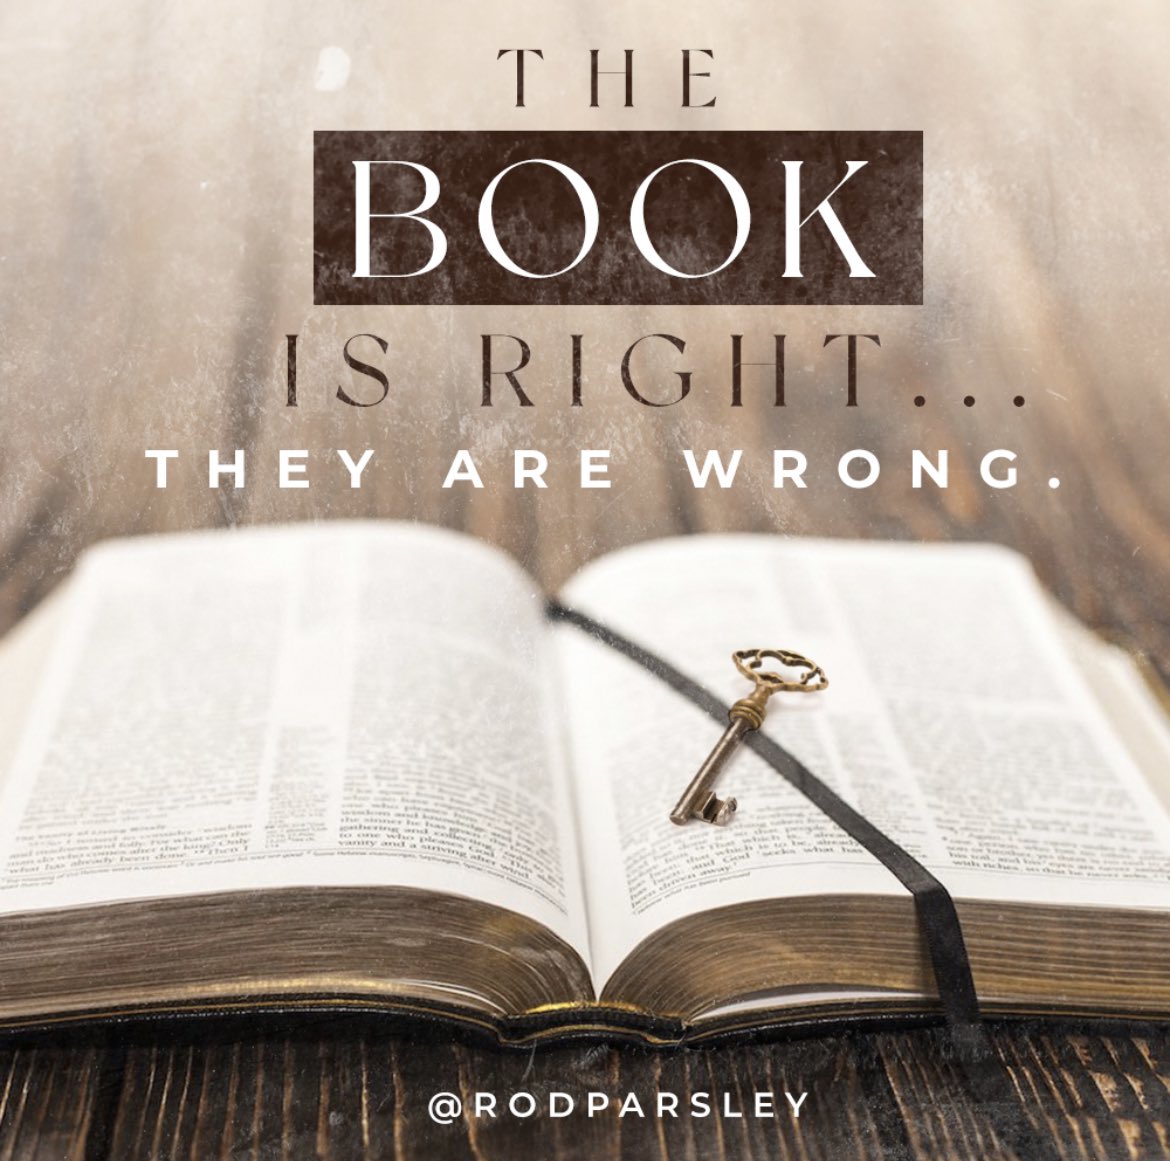 The book is right and they are wrong.
—
#TheBook #TheBible #TheWord #TheSword #PRPQuotes #Quotes #QOTD #QuoteOfTheDay #HisWord #Sunday #Service #SundayService #Bible #HolyBible #Right